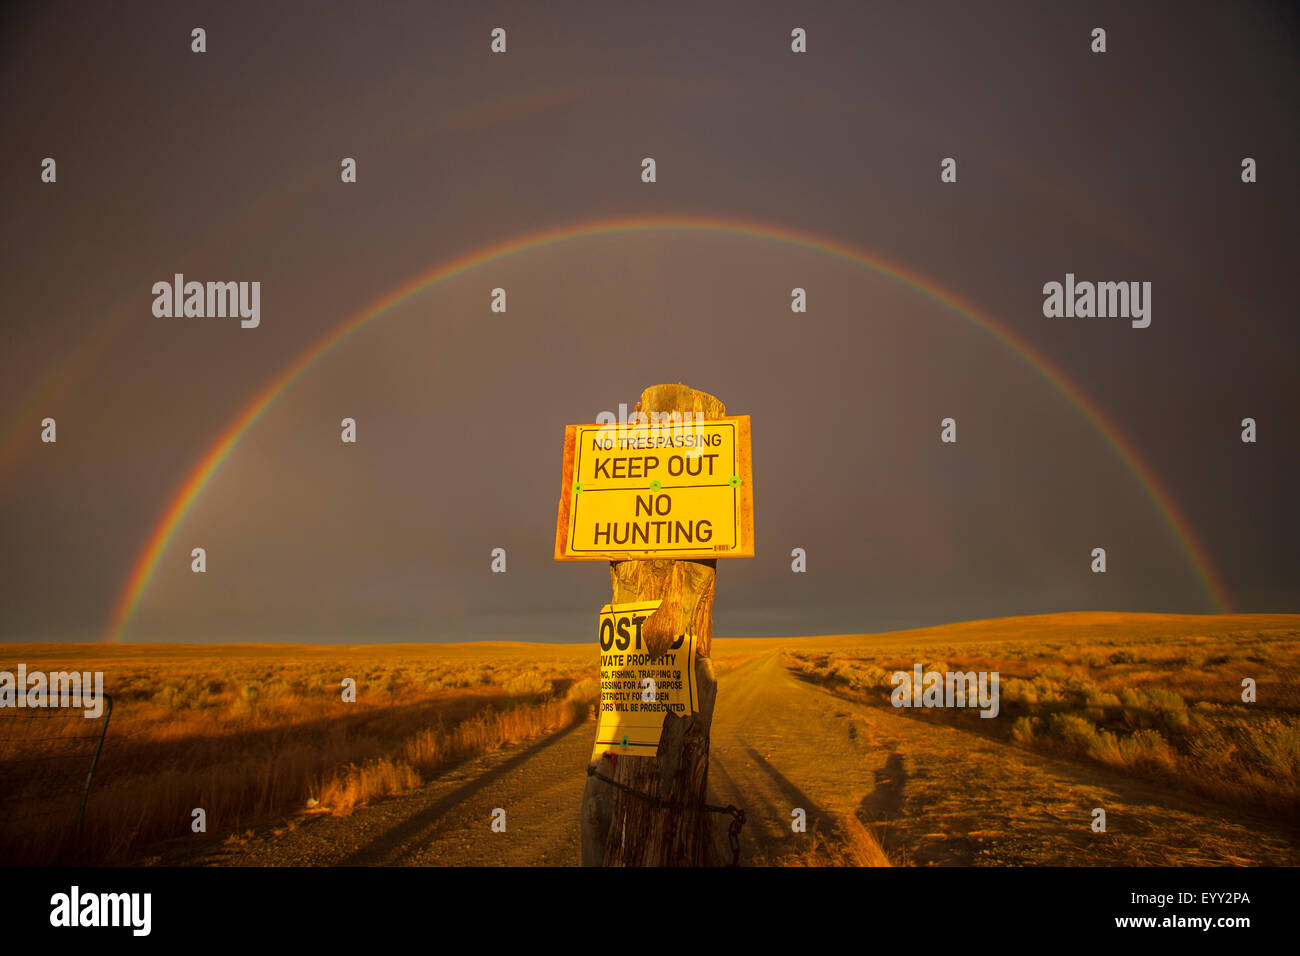 Warning sign in private fields under rainbow Stock Photo